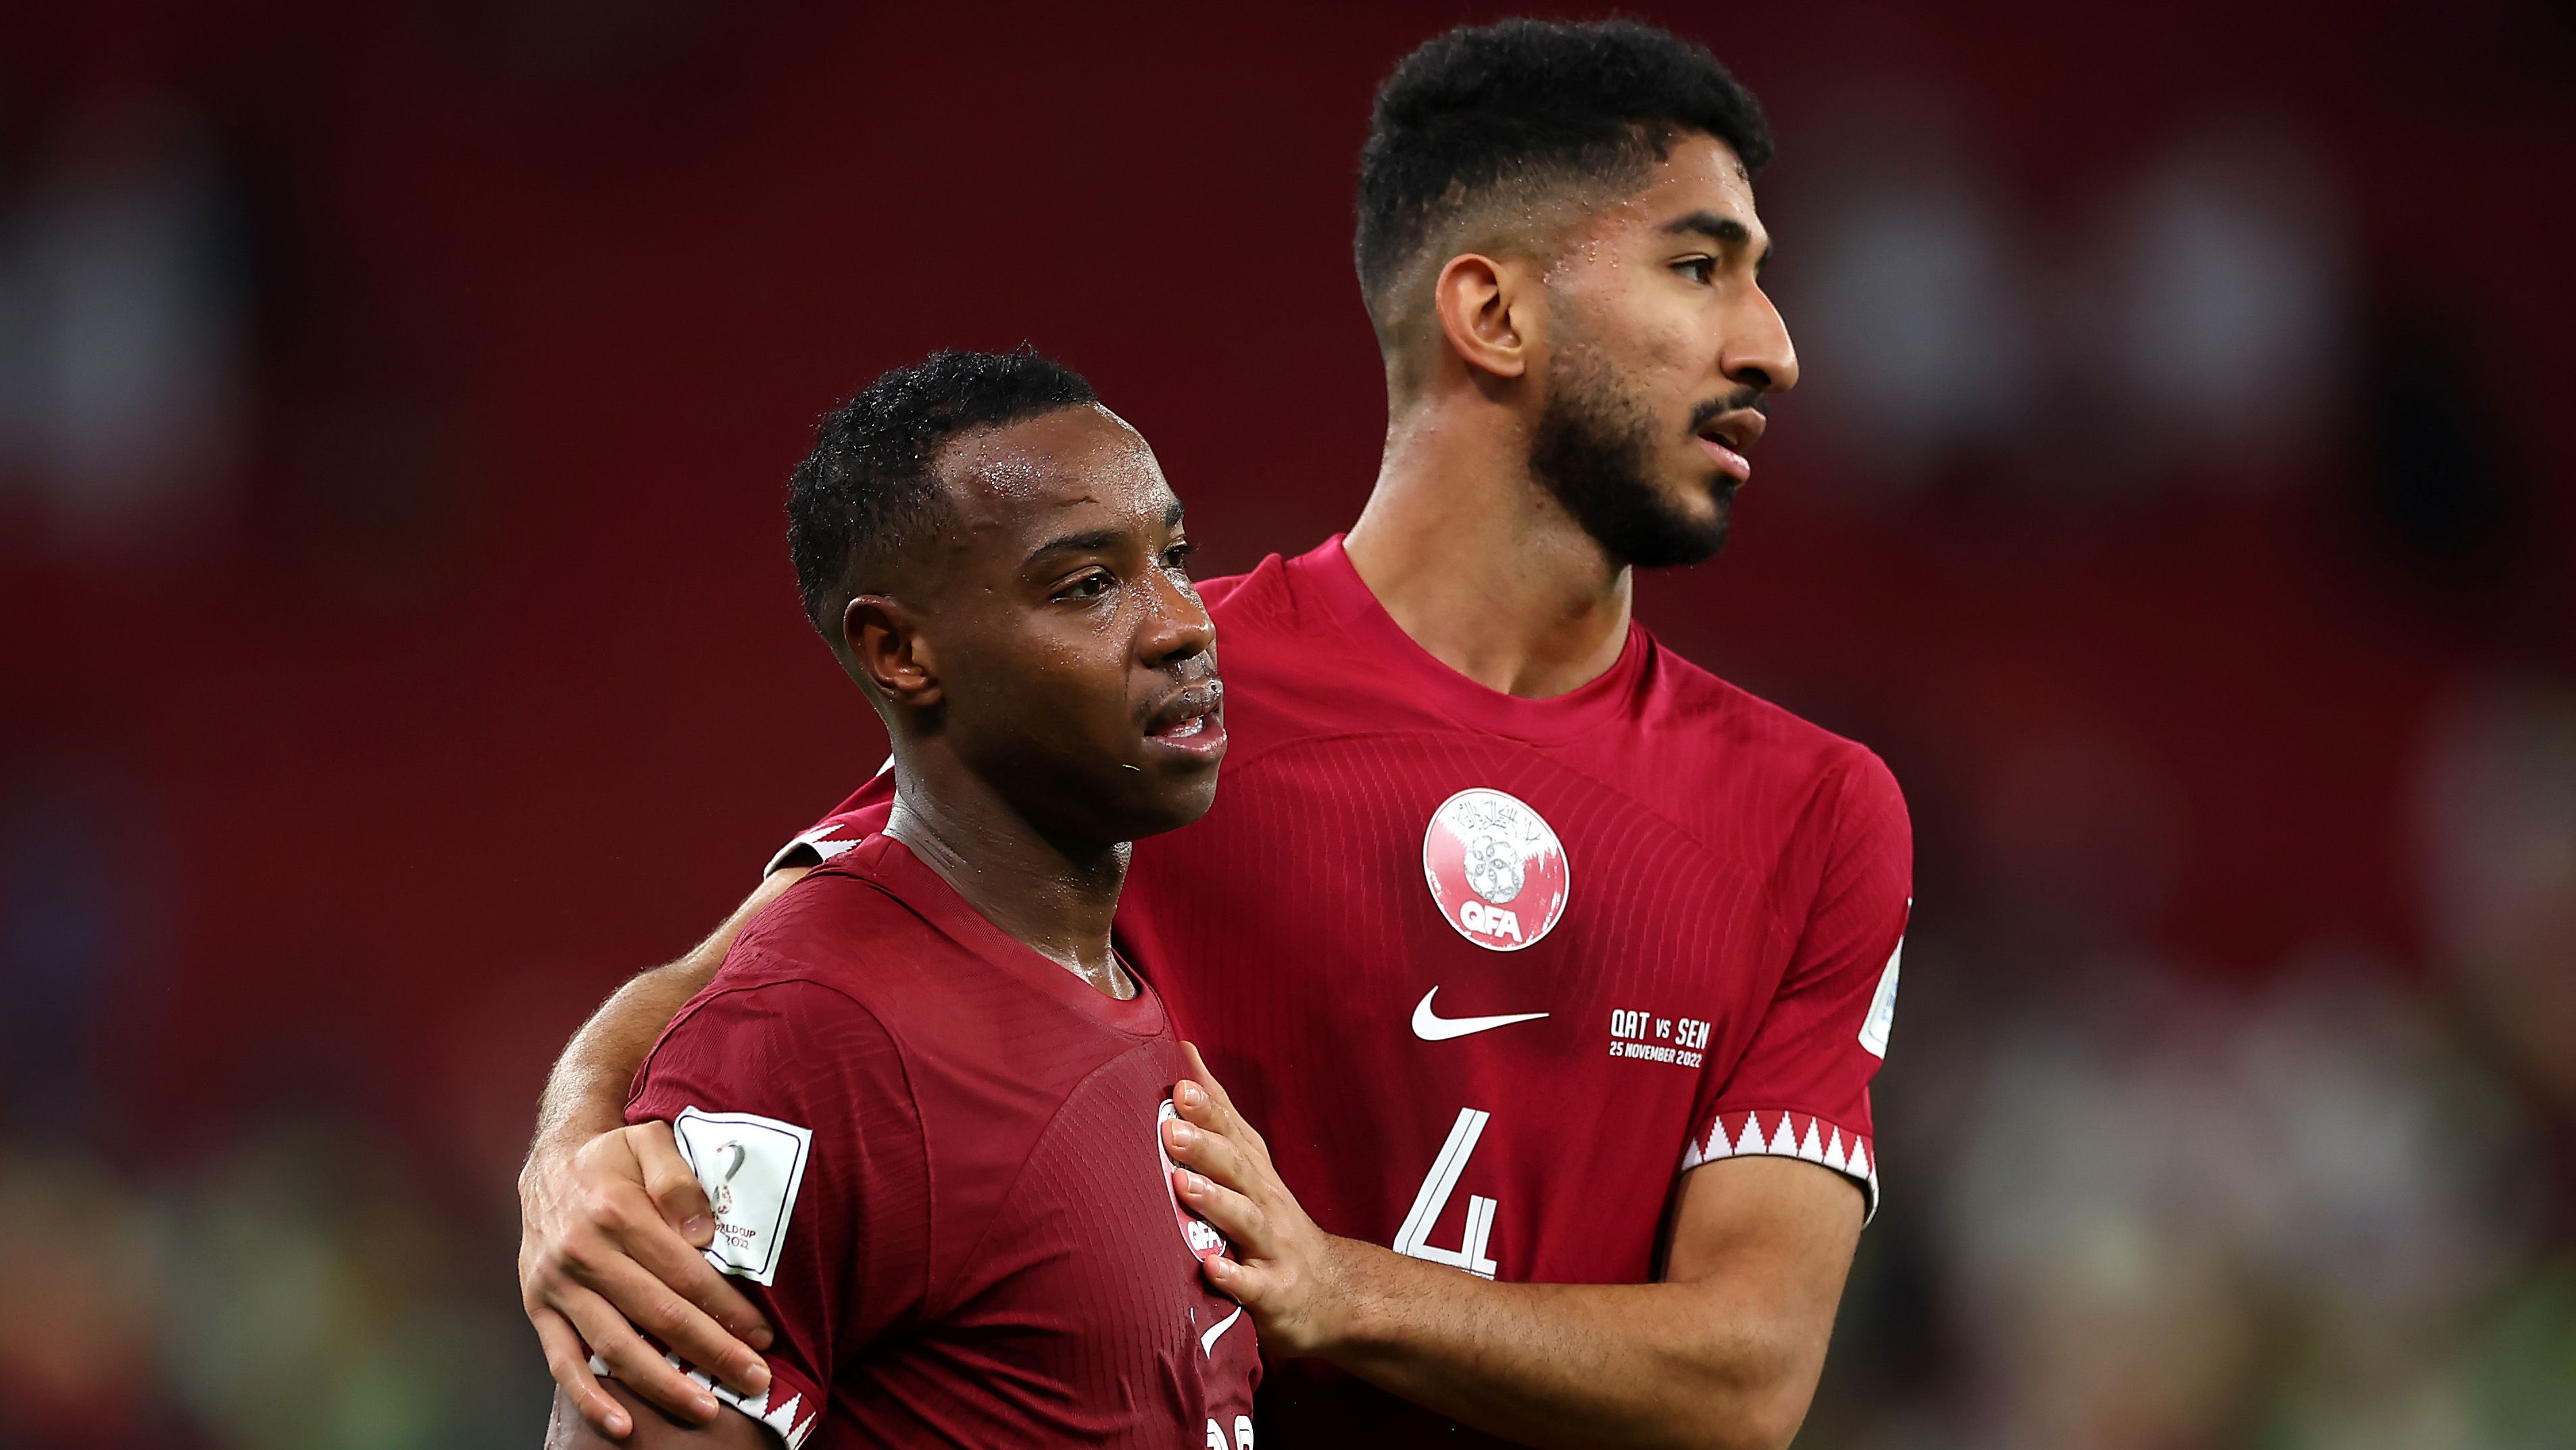 Assim Madibo and Mohammed Waad of Qatar show dejection after their 1-3 defeat in  the FIFA World Cup Qatar 2022 Group A match between Qatar and Senegal at Al Thumama Stadium on November 25, 2022 in Doha, Qatar. (Photo by Alex Grimm/Getty Images)